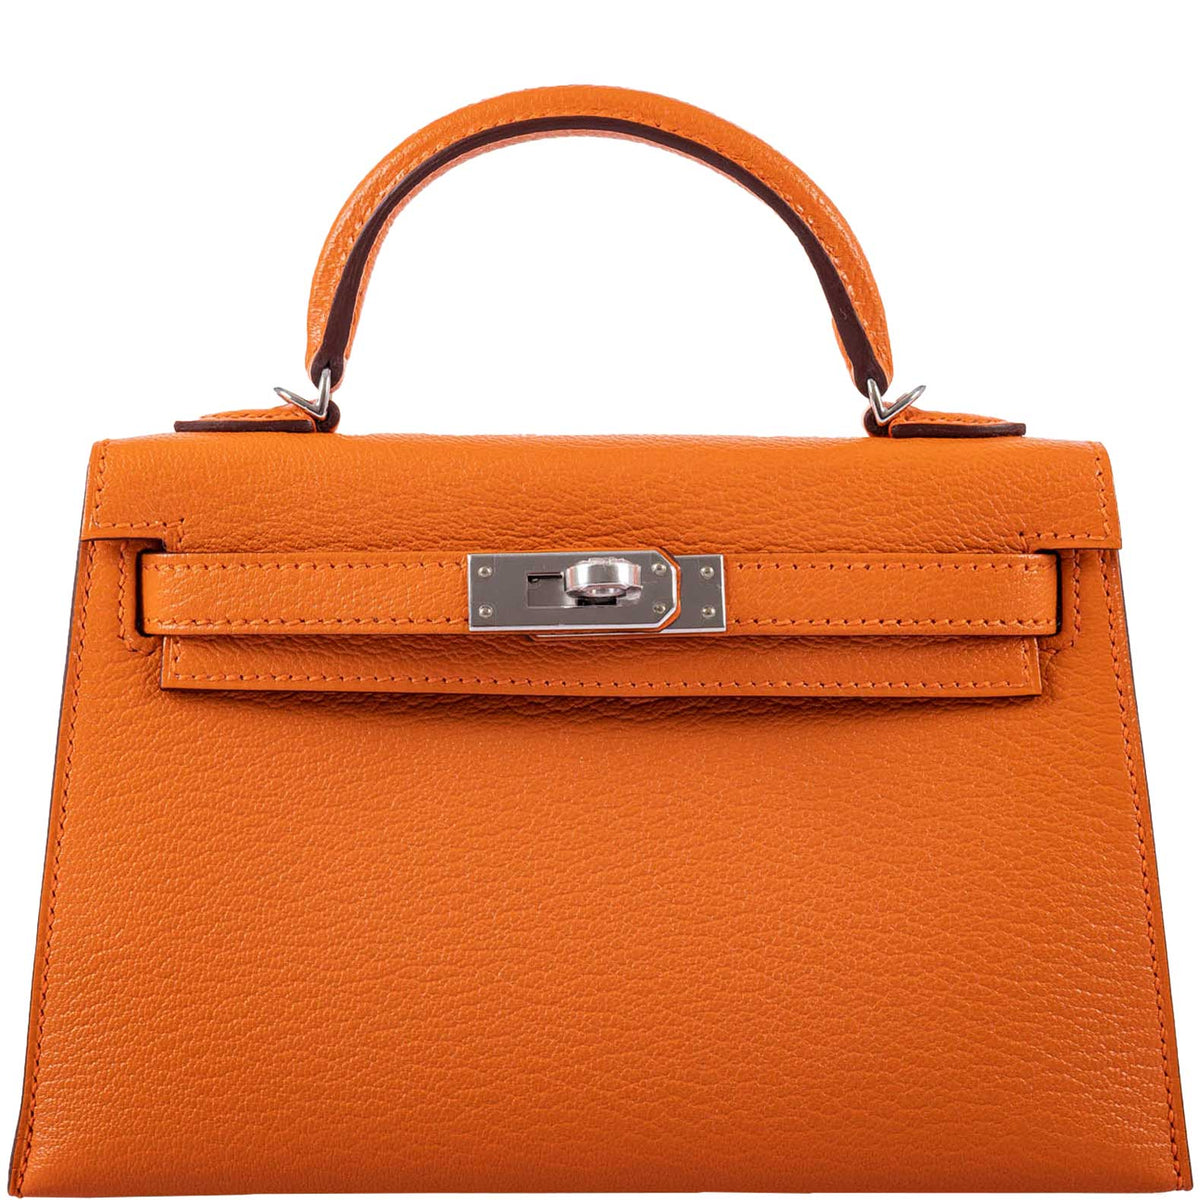 A LIMITED EDITION ORANGE H & GOLD CHÈVRE LEATHER MINI KELLY 20 II